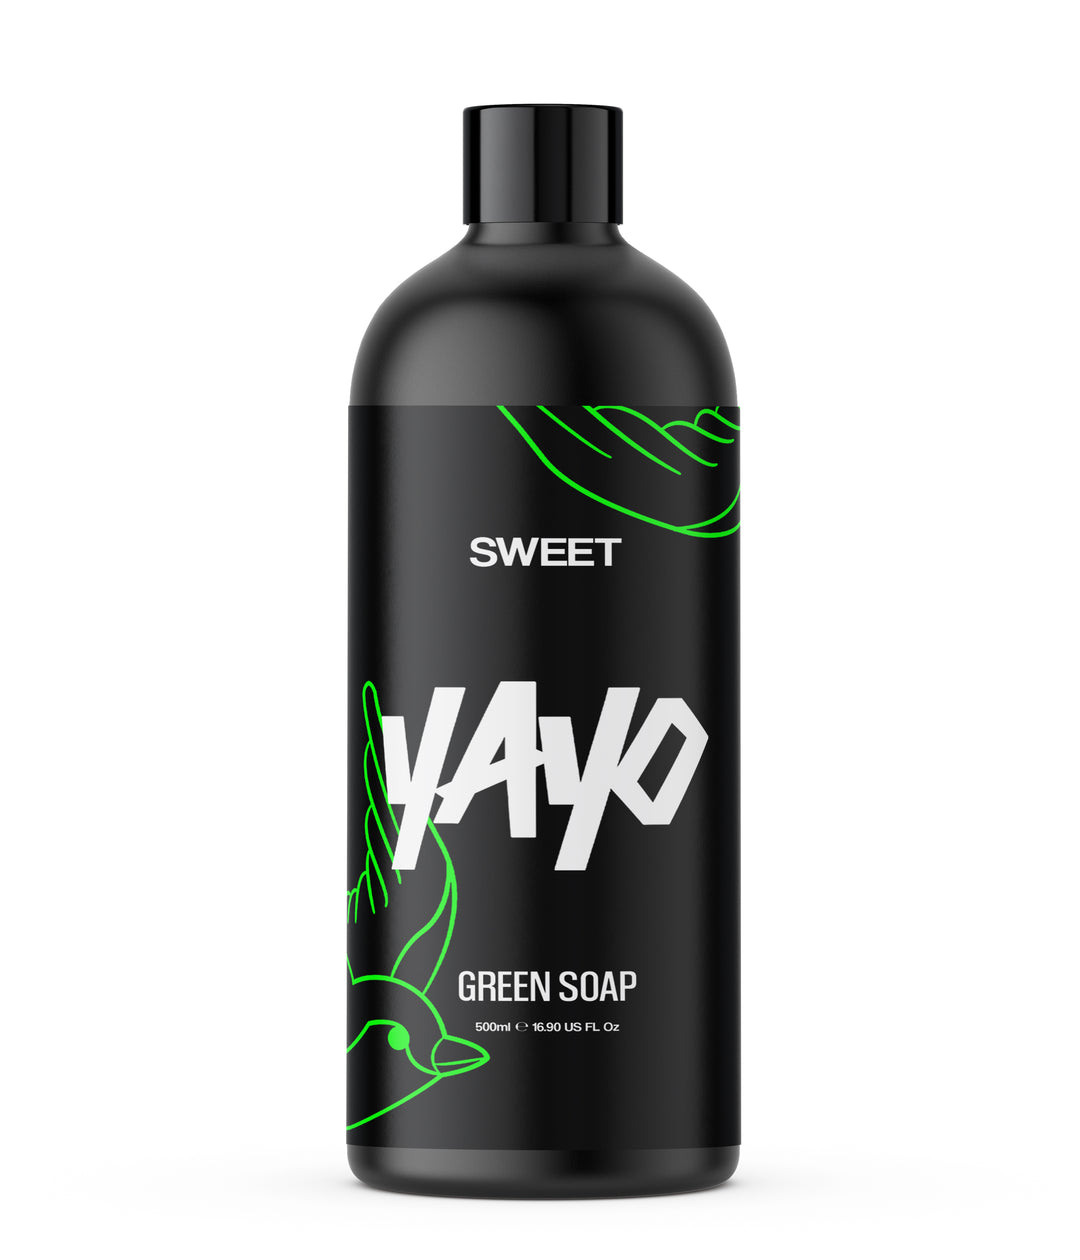 Sweet Green Soap & Cleansing Foam Concentrate